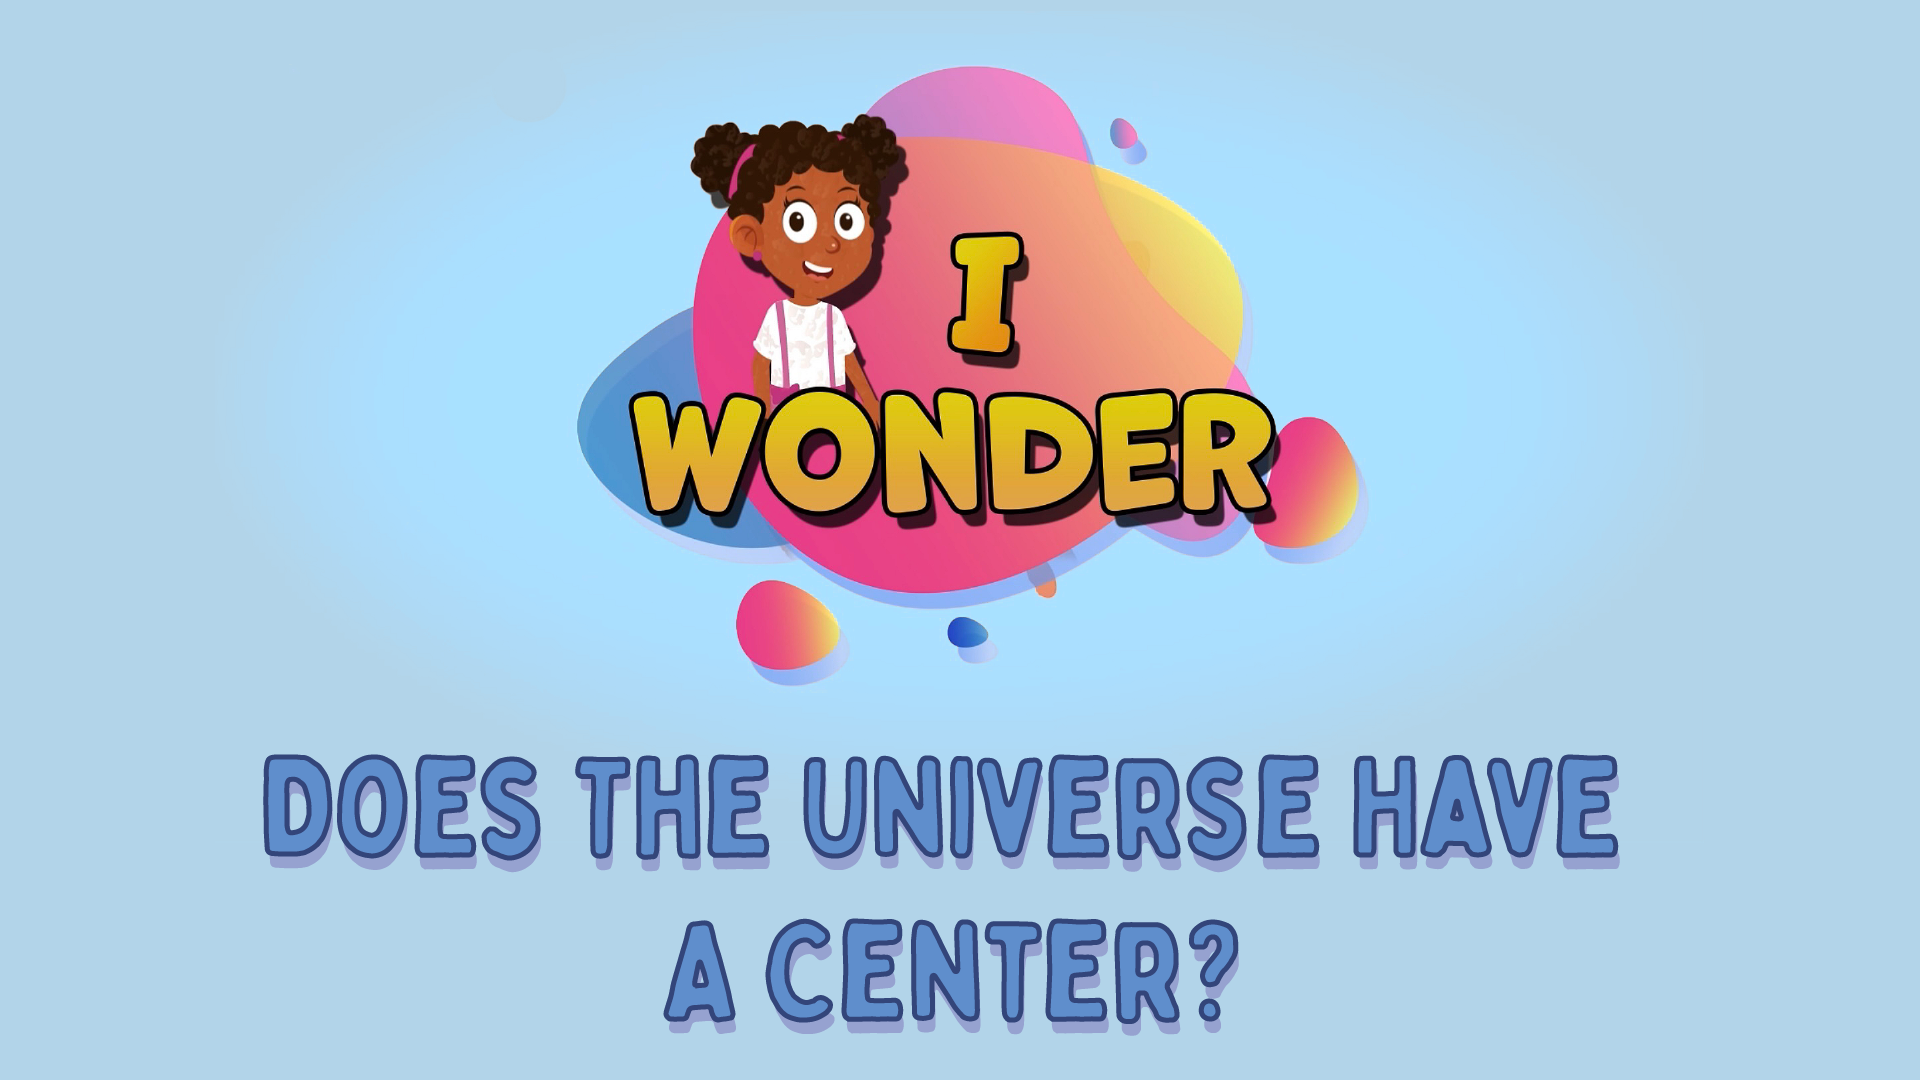 Does The Universe Have A Center?